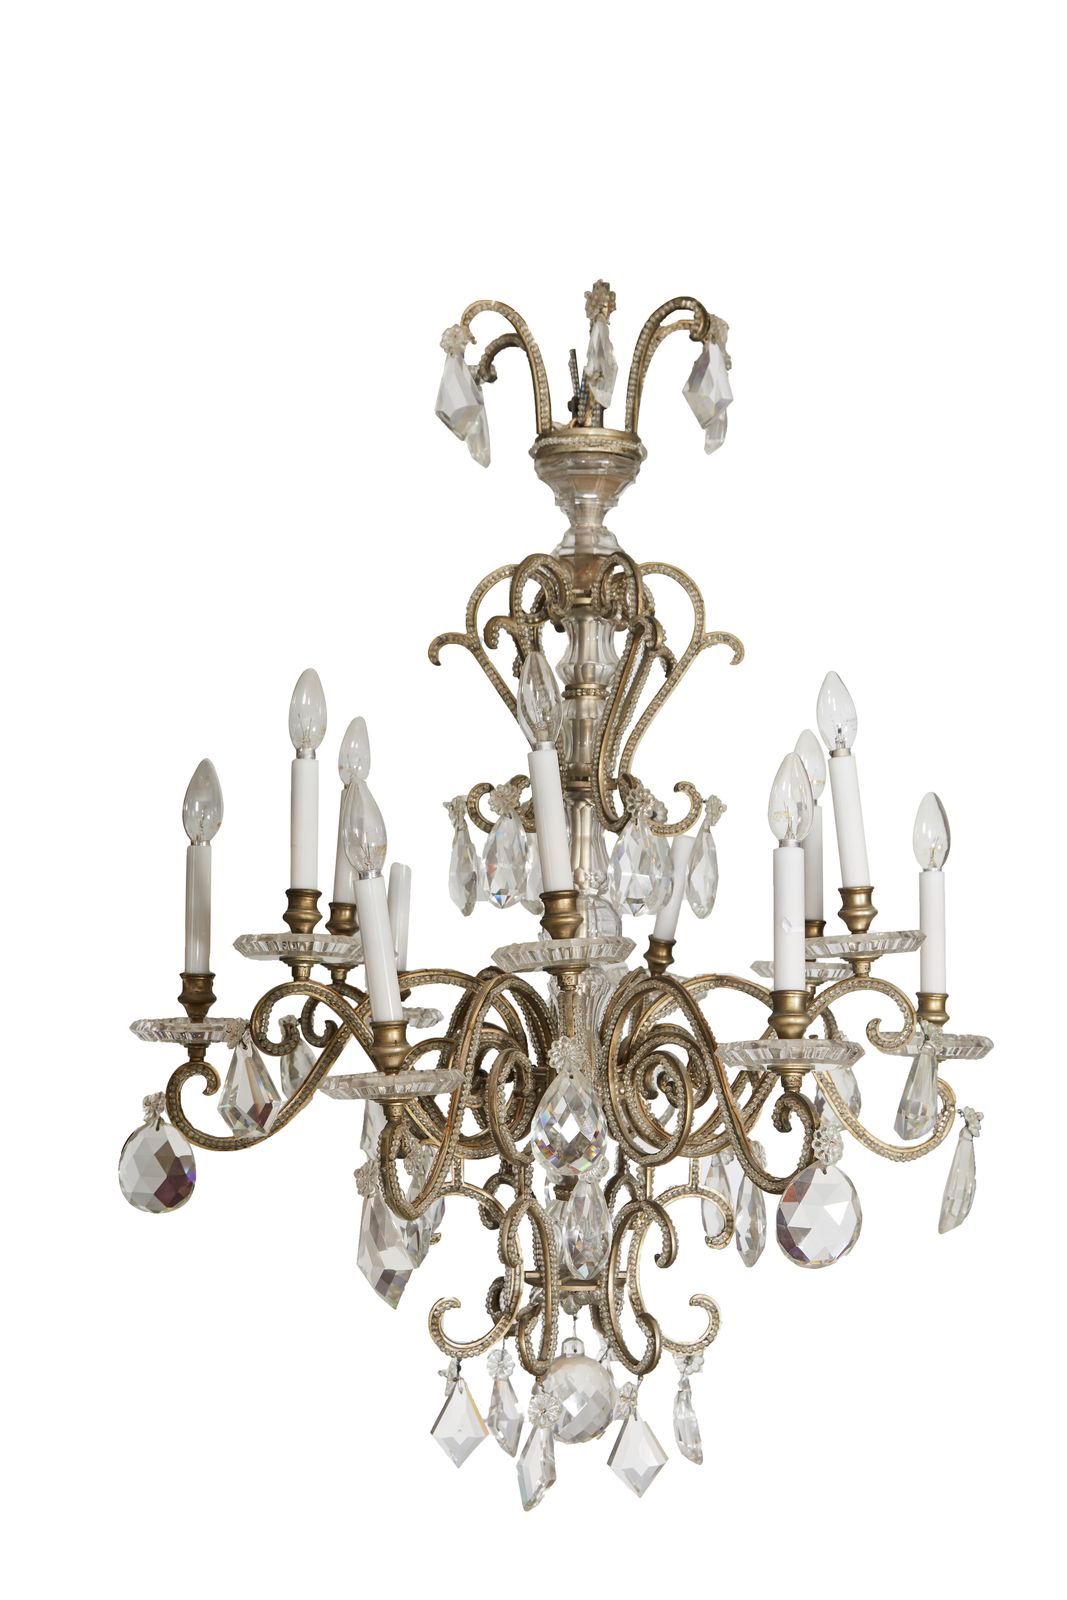 Null 176 BACCARAT

Cage chandelier with twelve arms of light in bronze, the shaf&hellip;